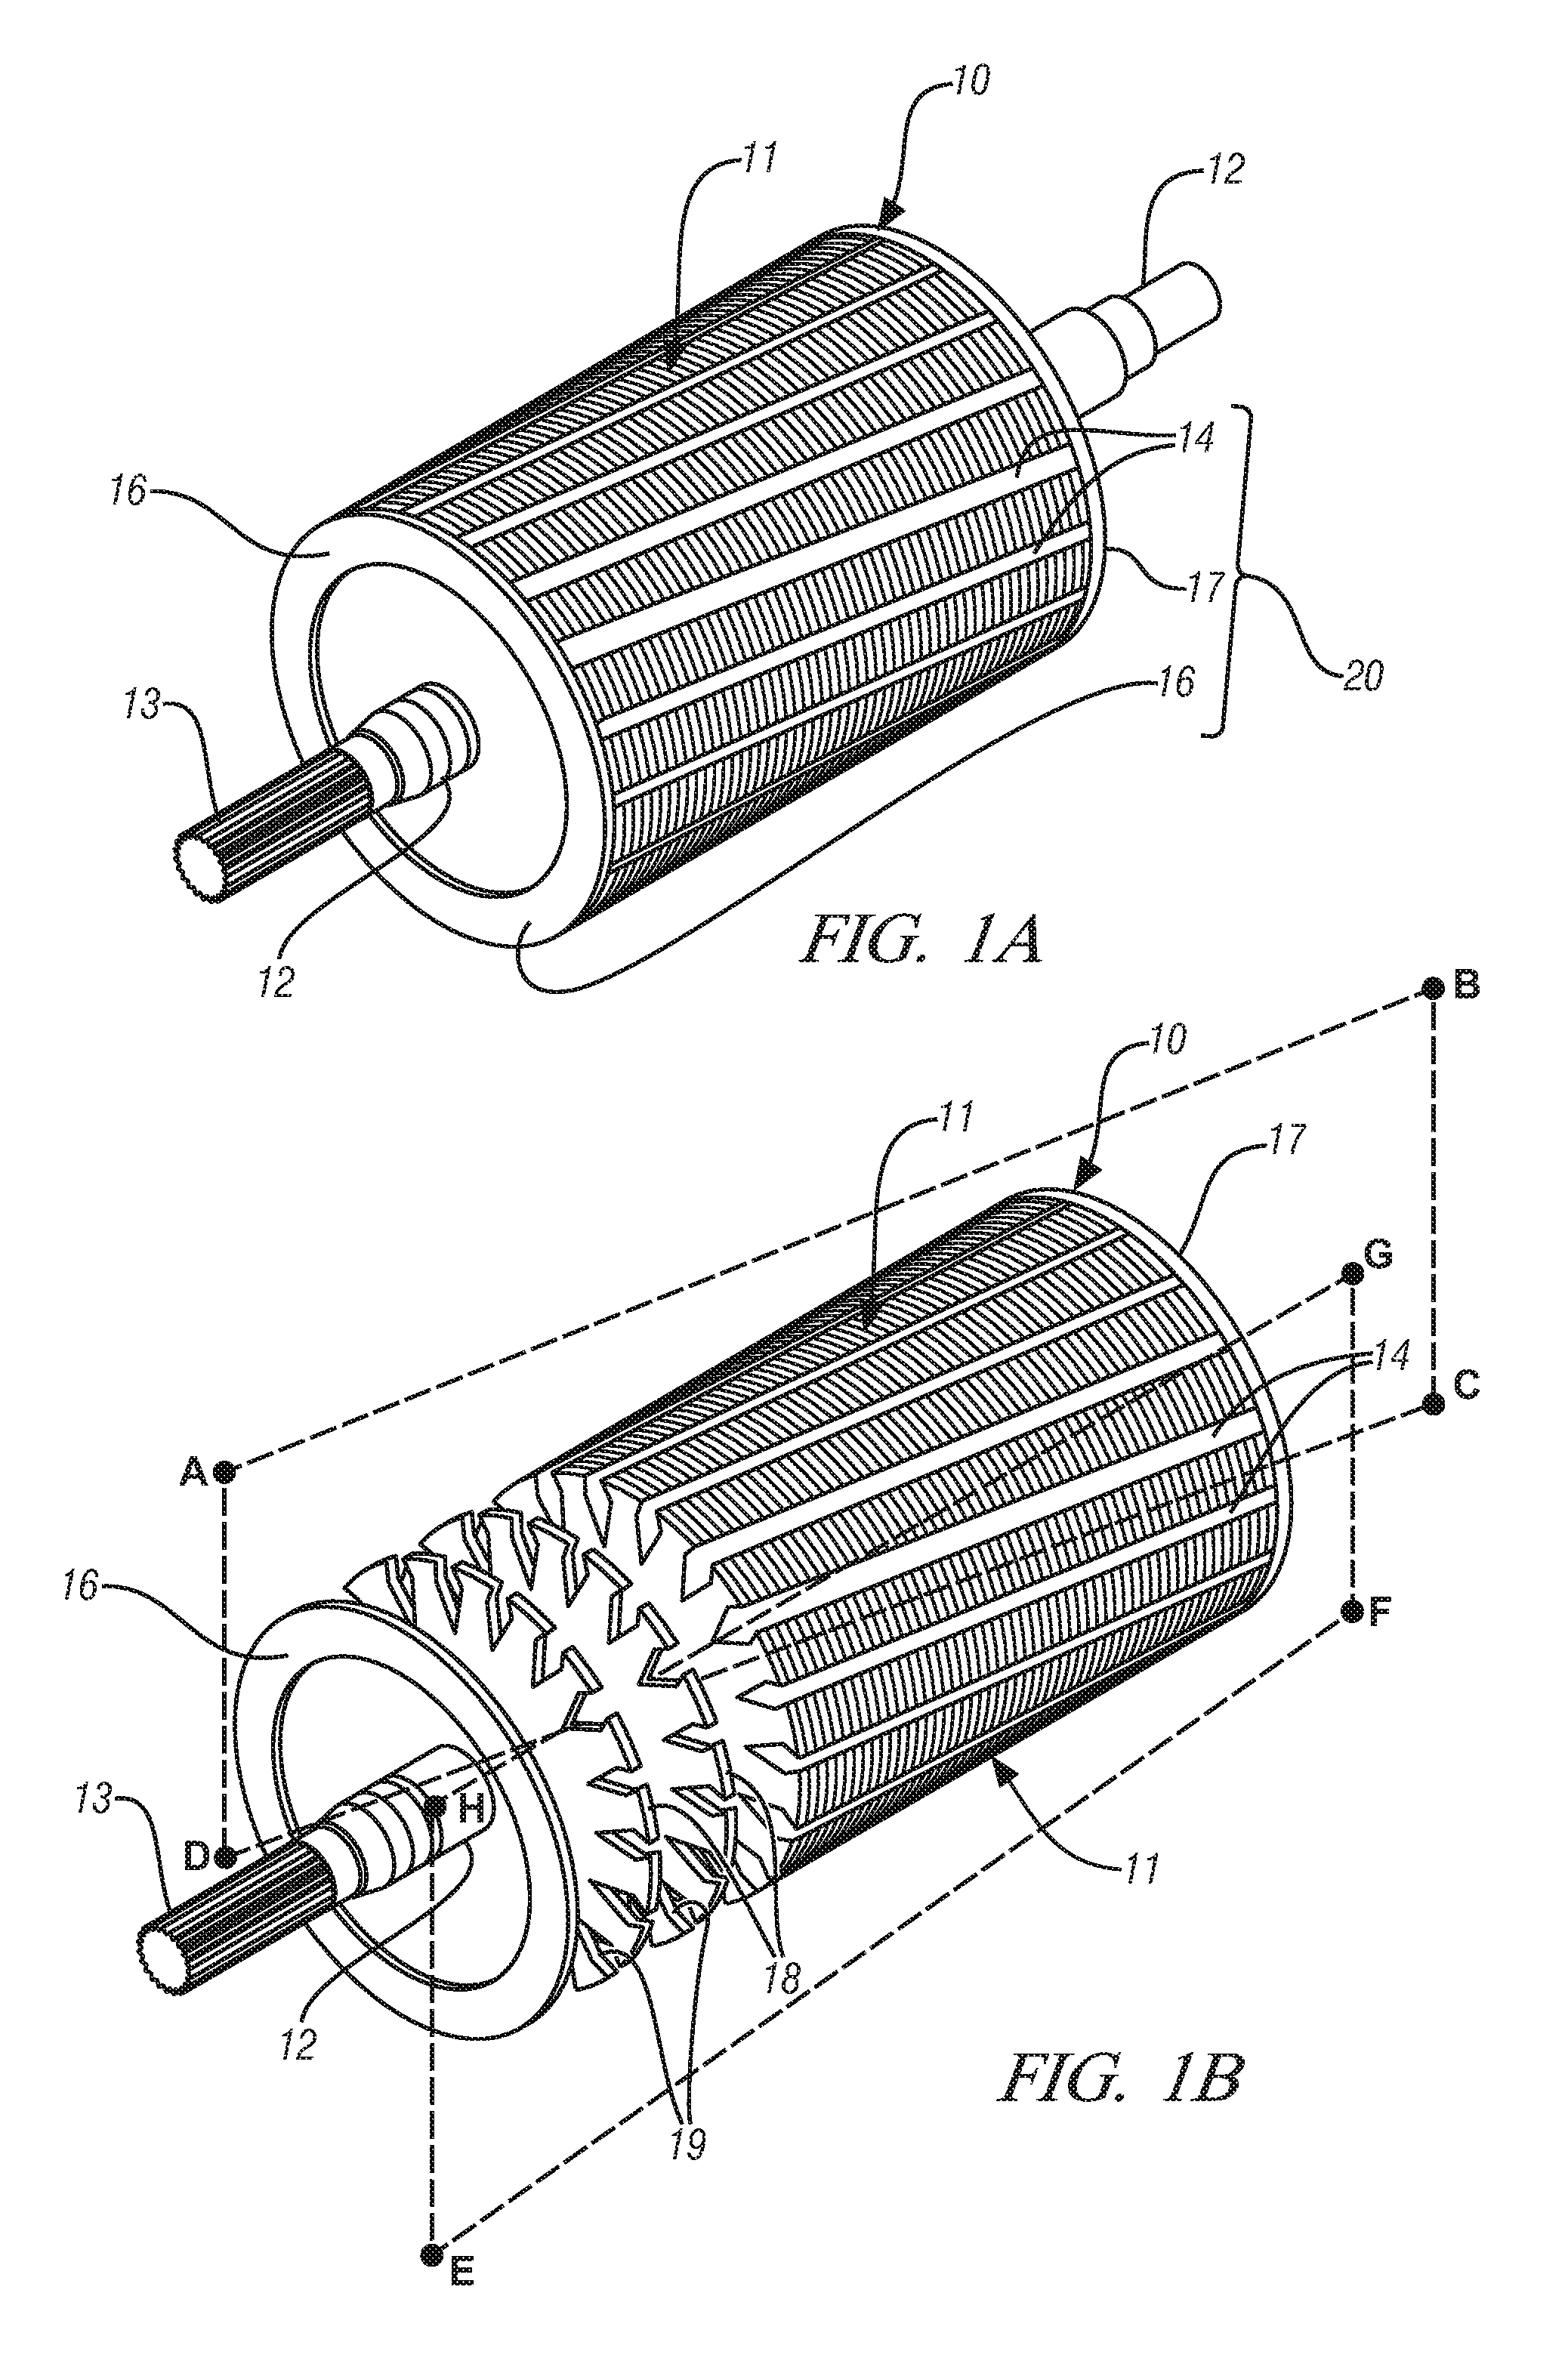 Centrifugally-cast shorted structure for induction motor rotors